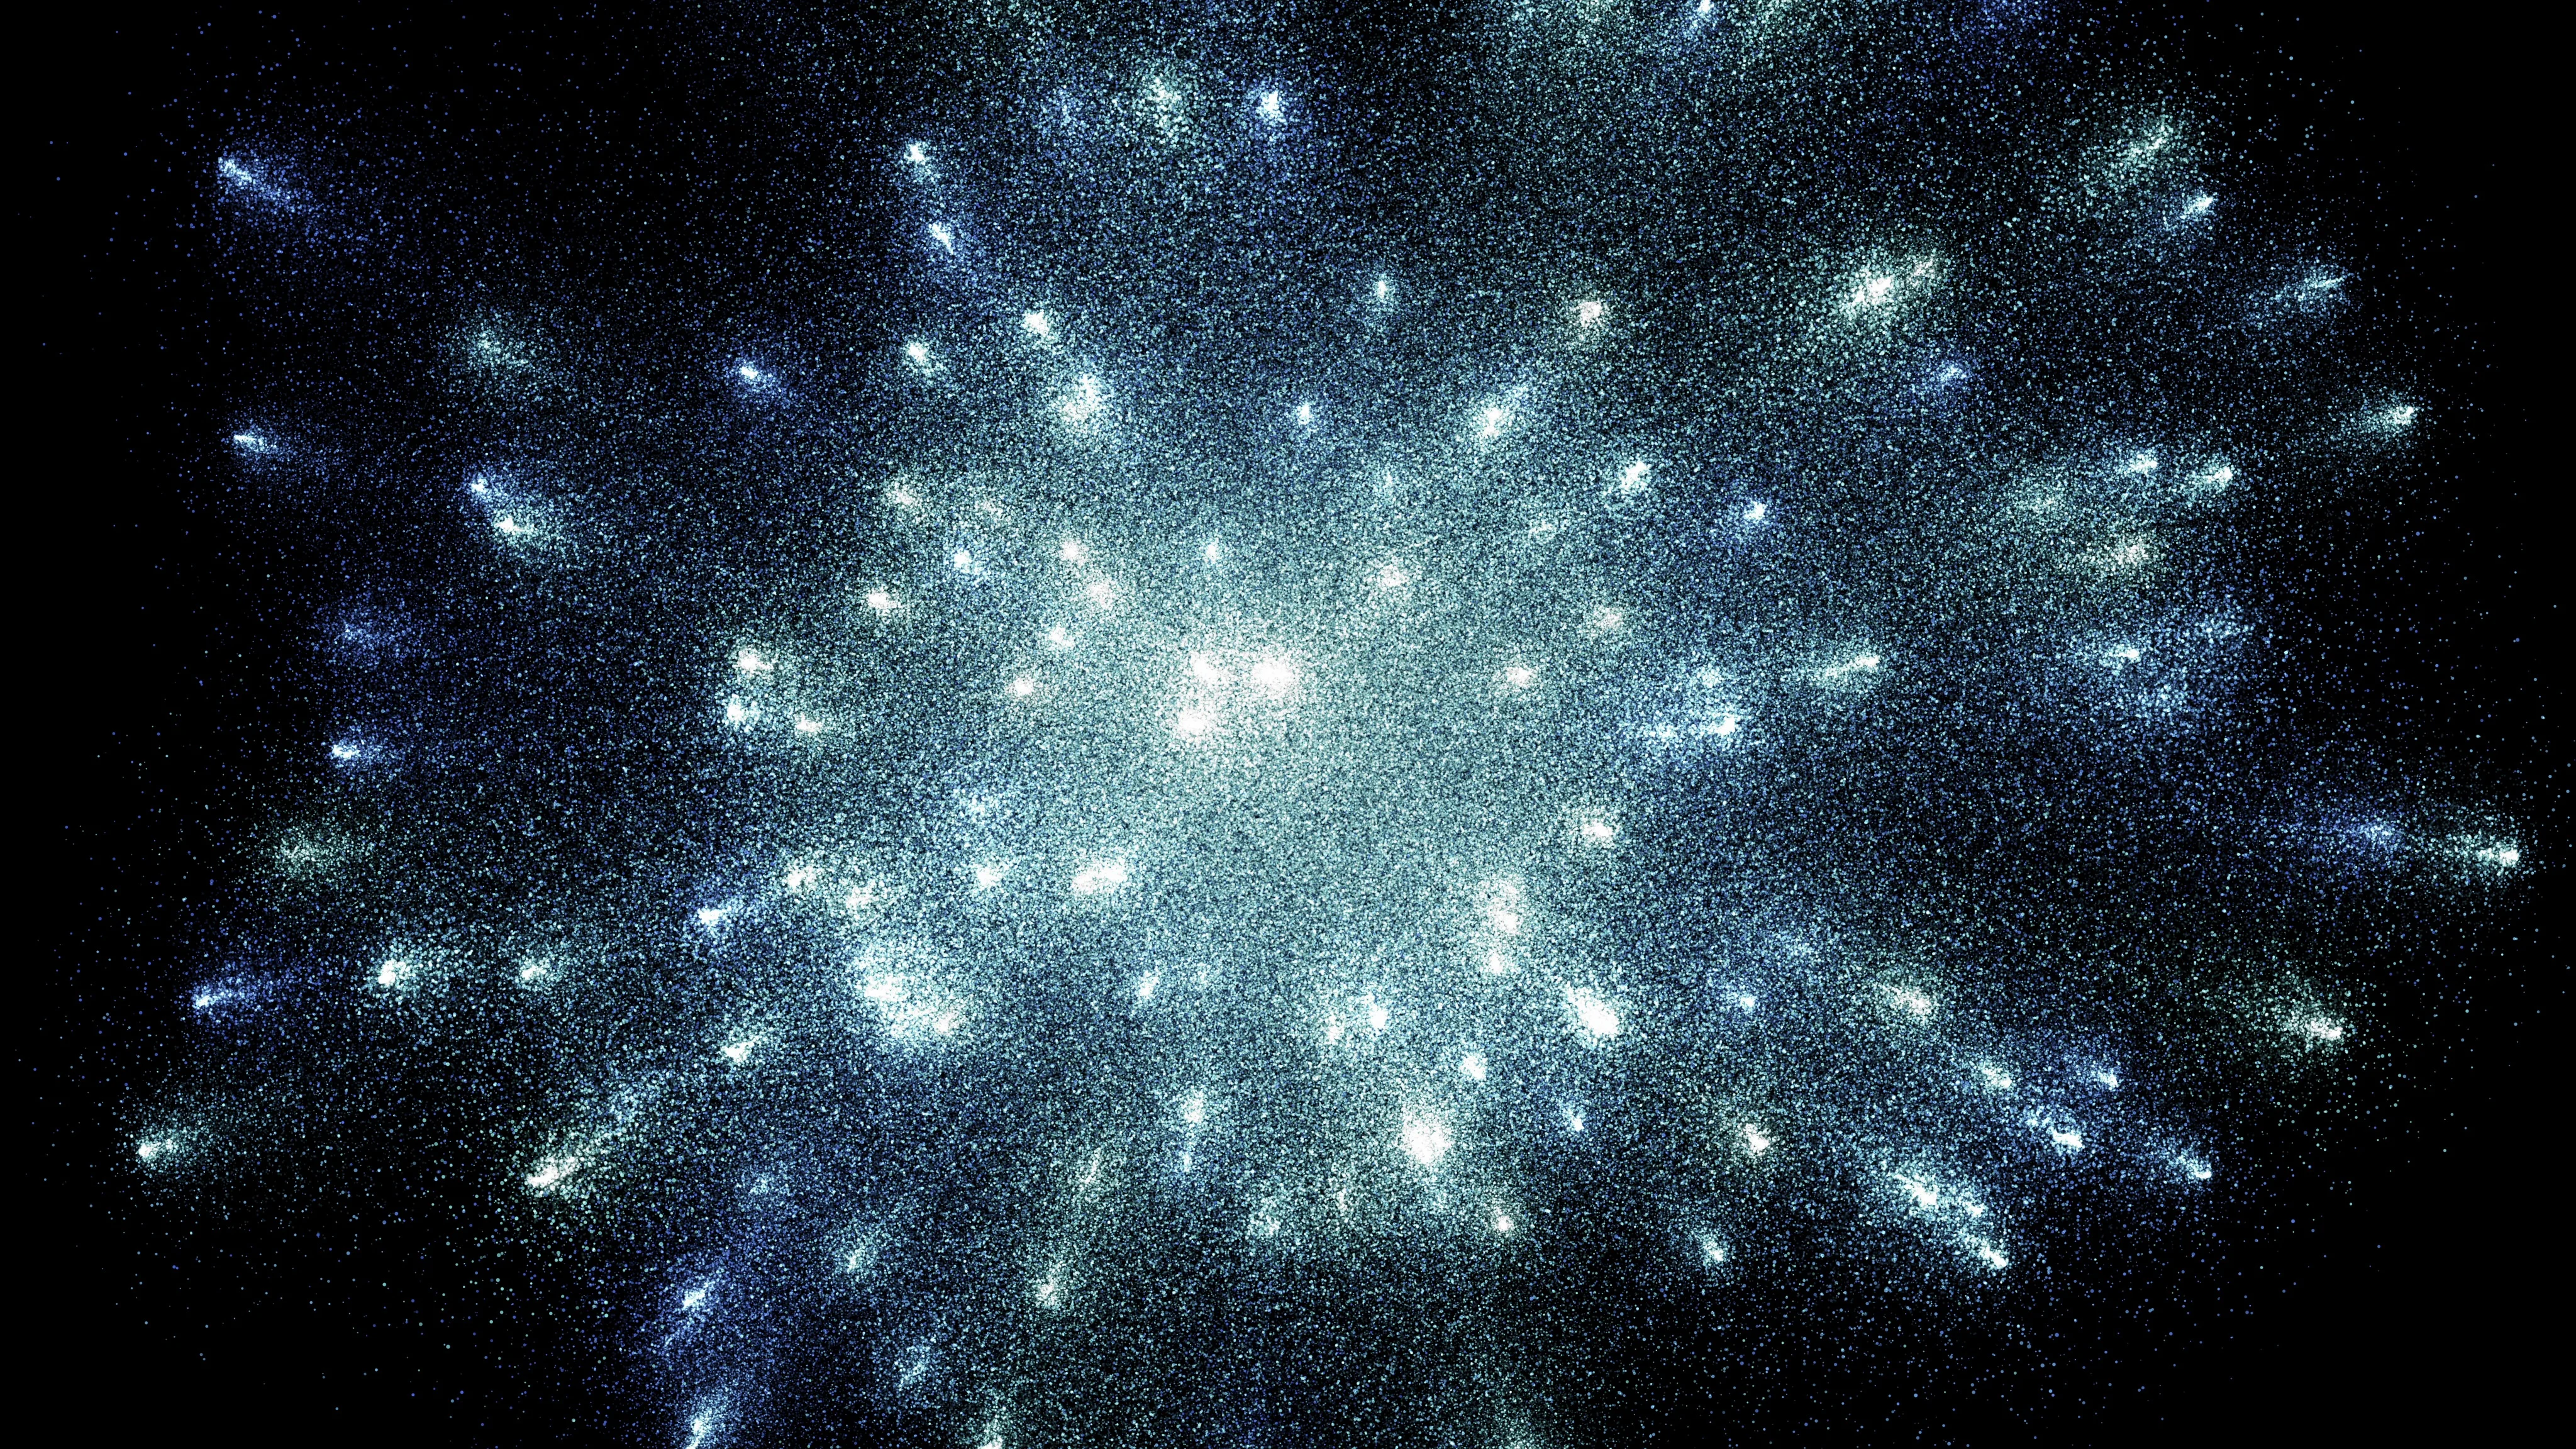 Particle Explosion Wallpaper